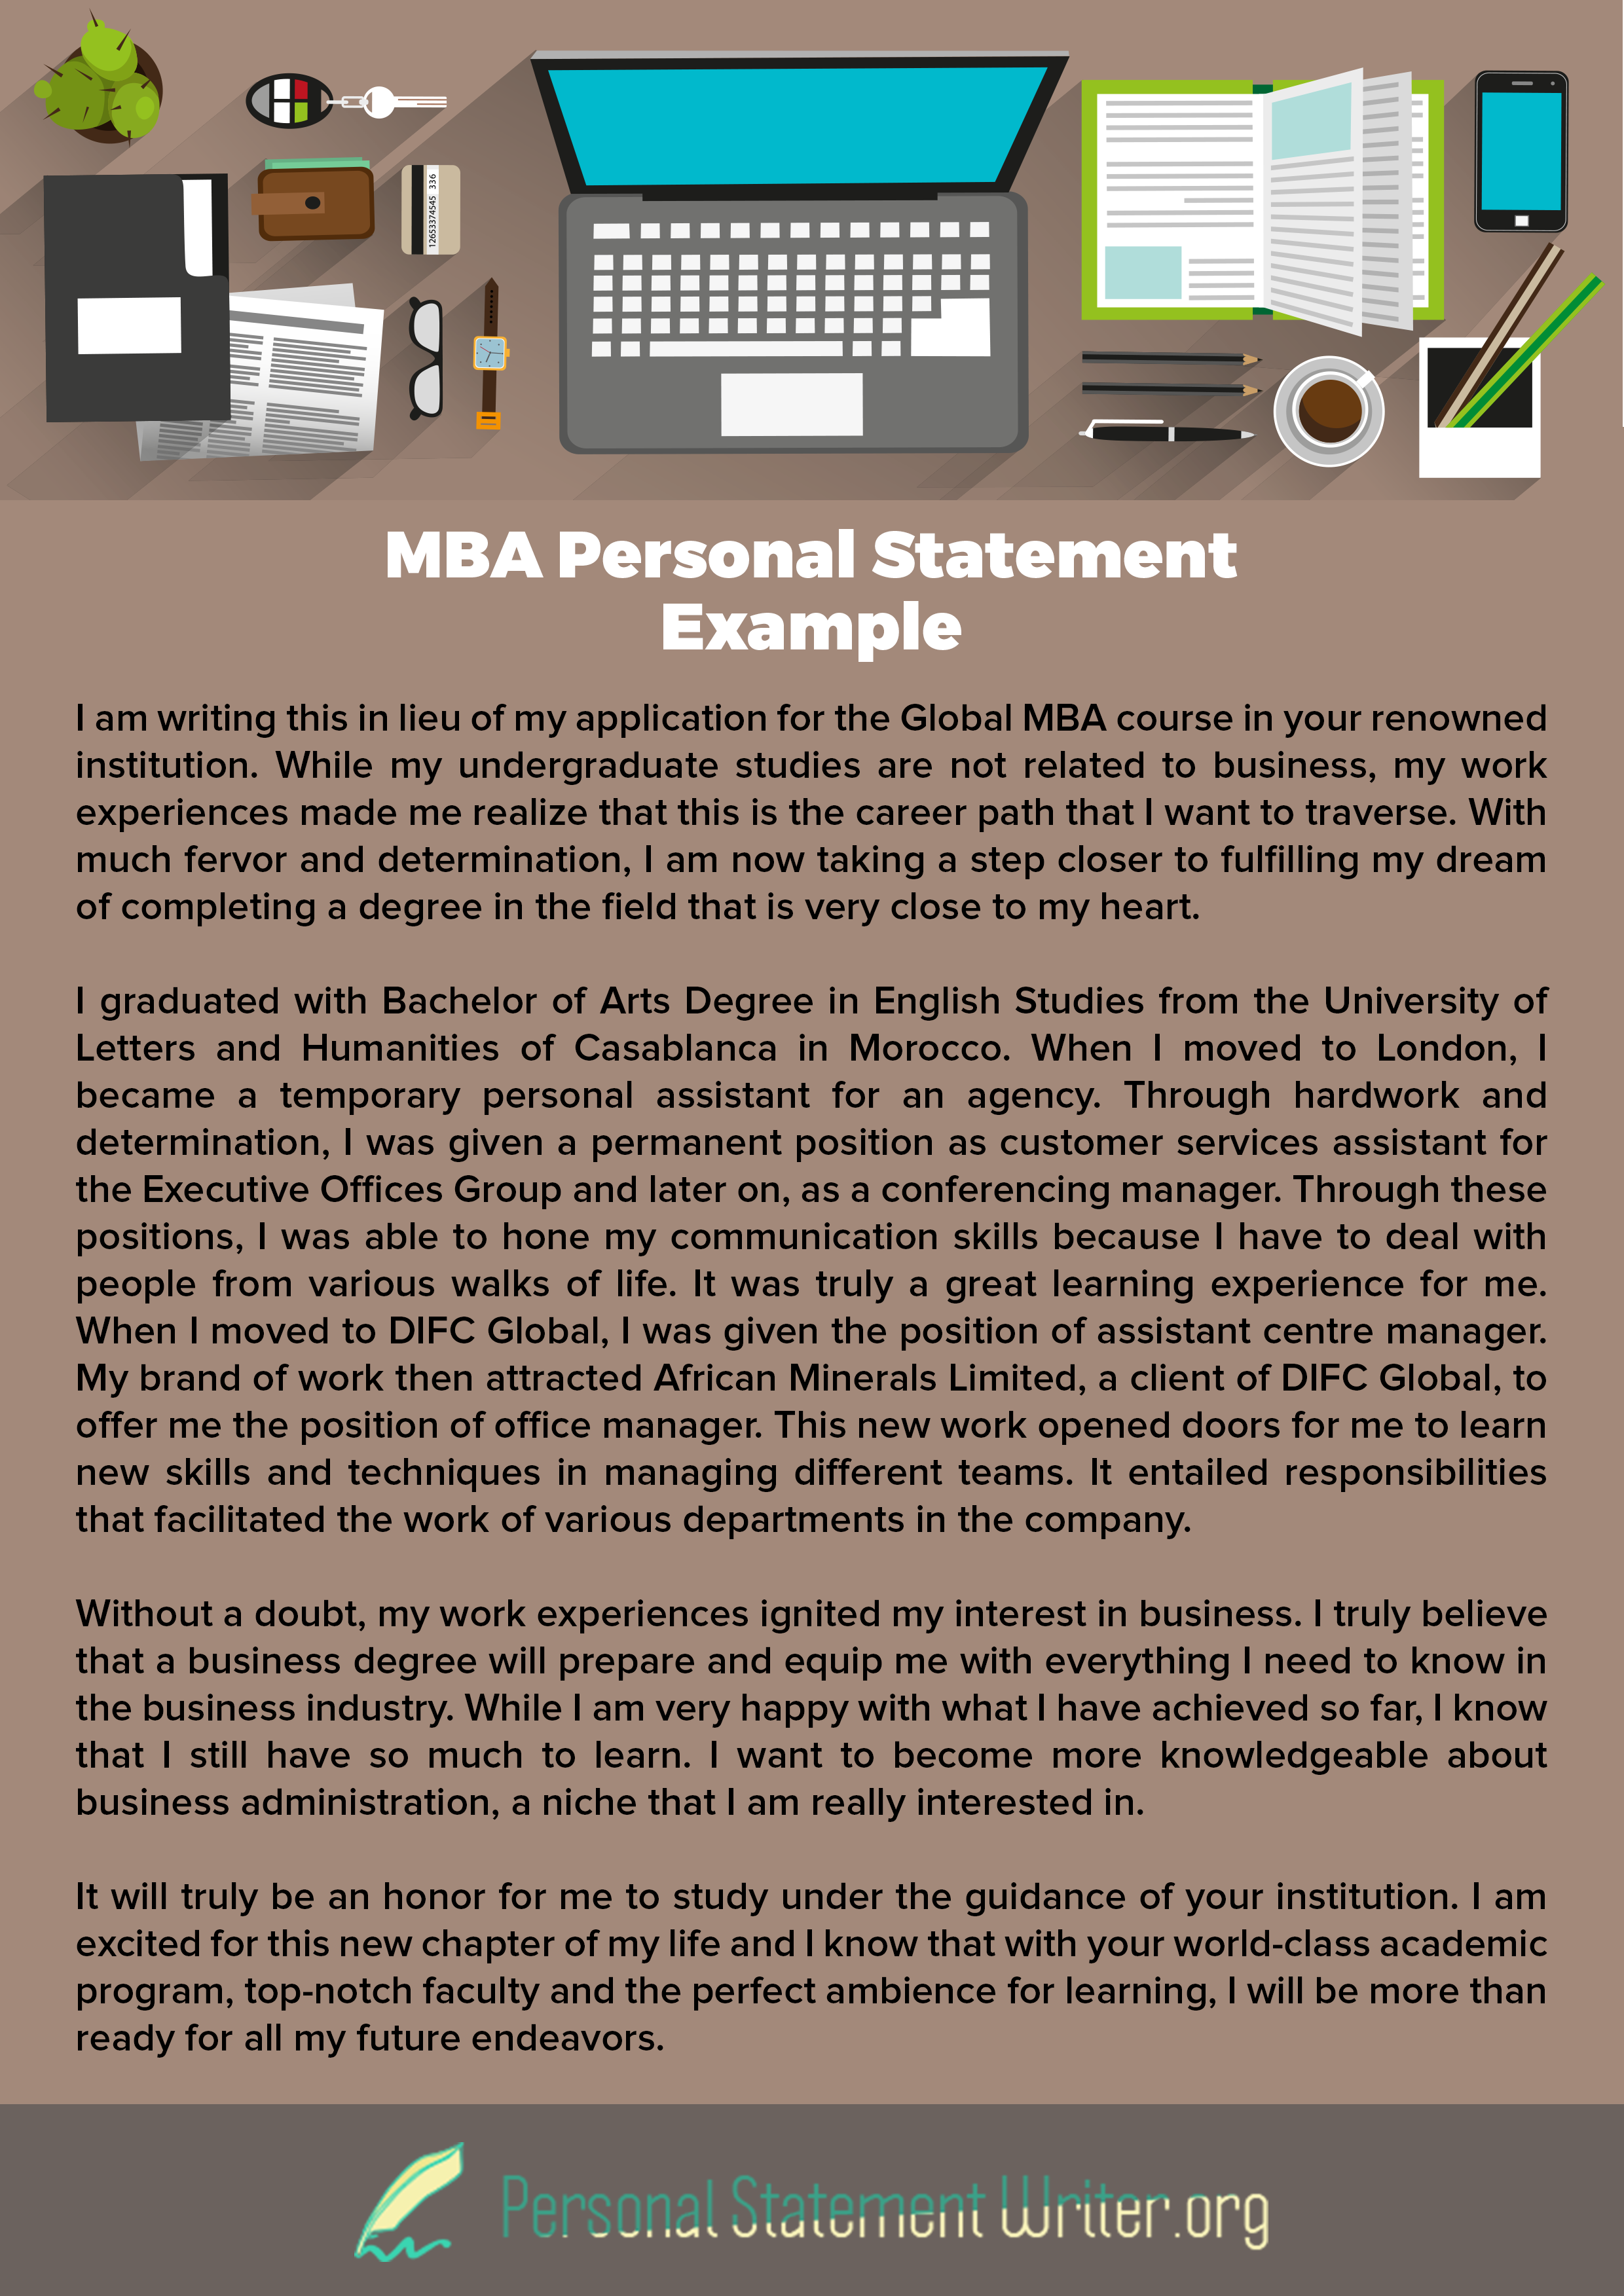 10 MBA Personal Statement Examples: How To Write An Application